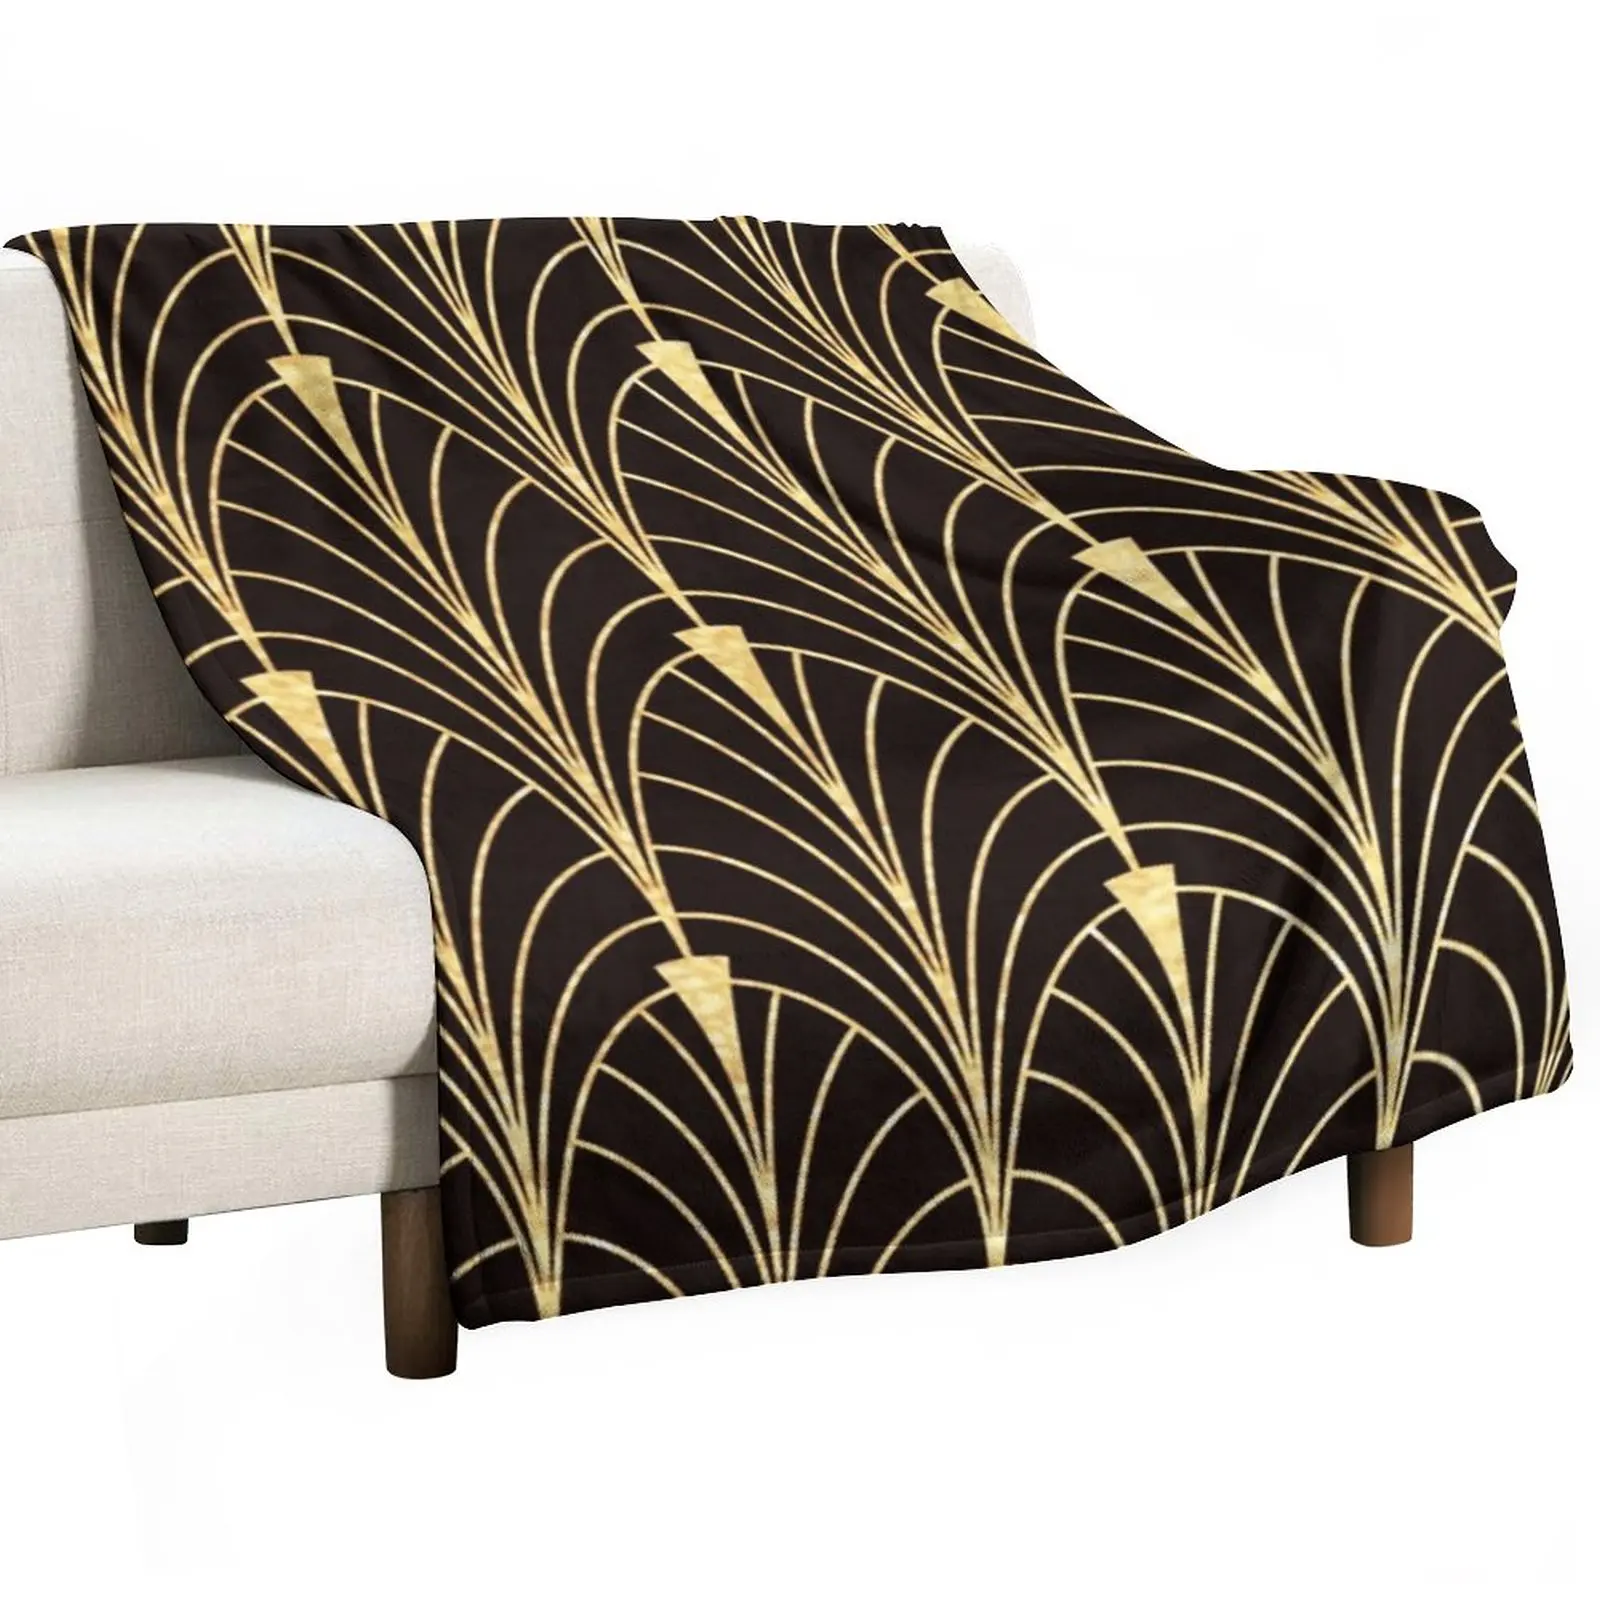 

Sophisticated Glitzy (Faux) Gold Art Deco Pattern Throw Blanket Retro Blankets Soft Bed Blankets